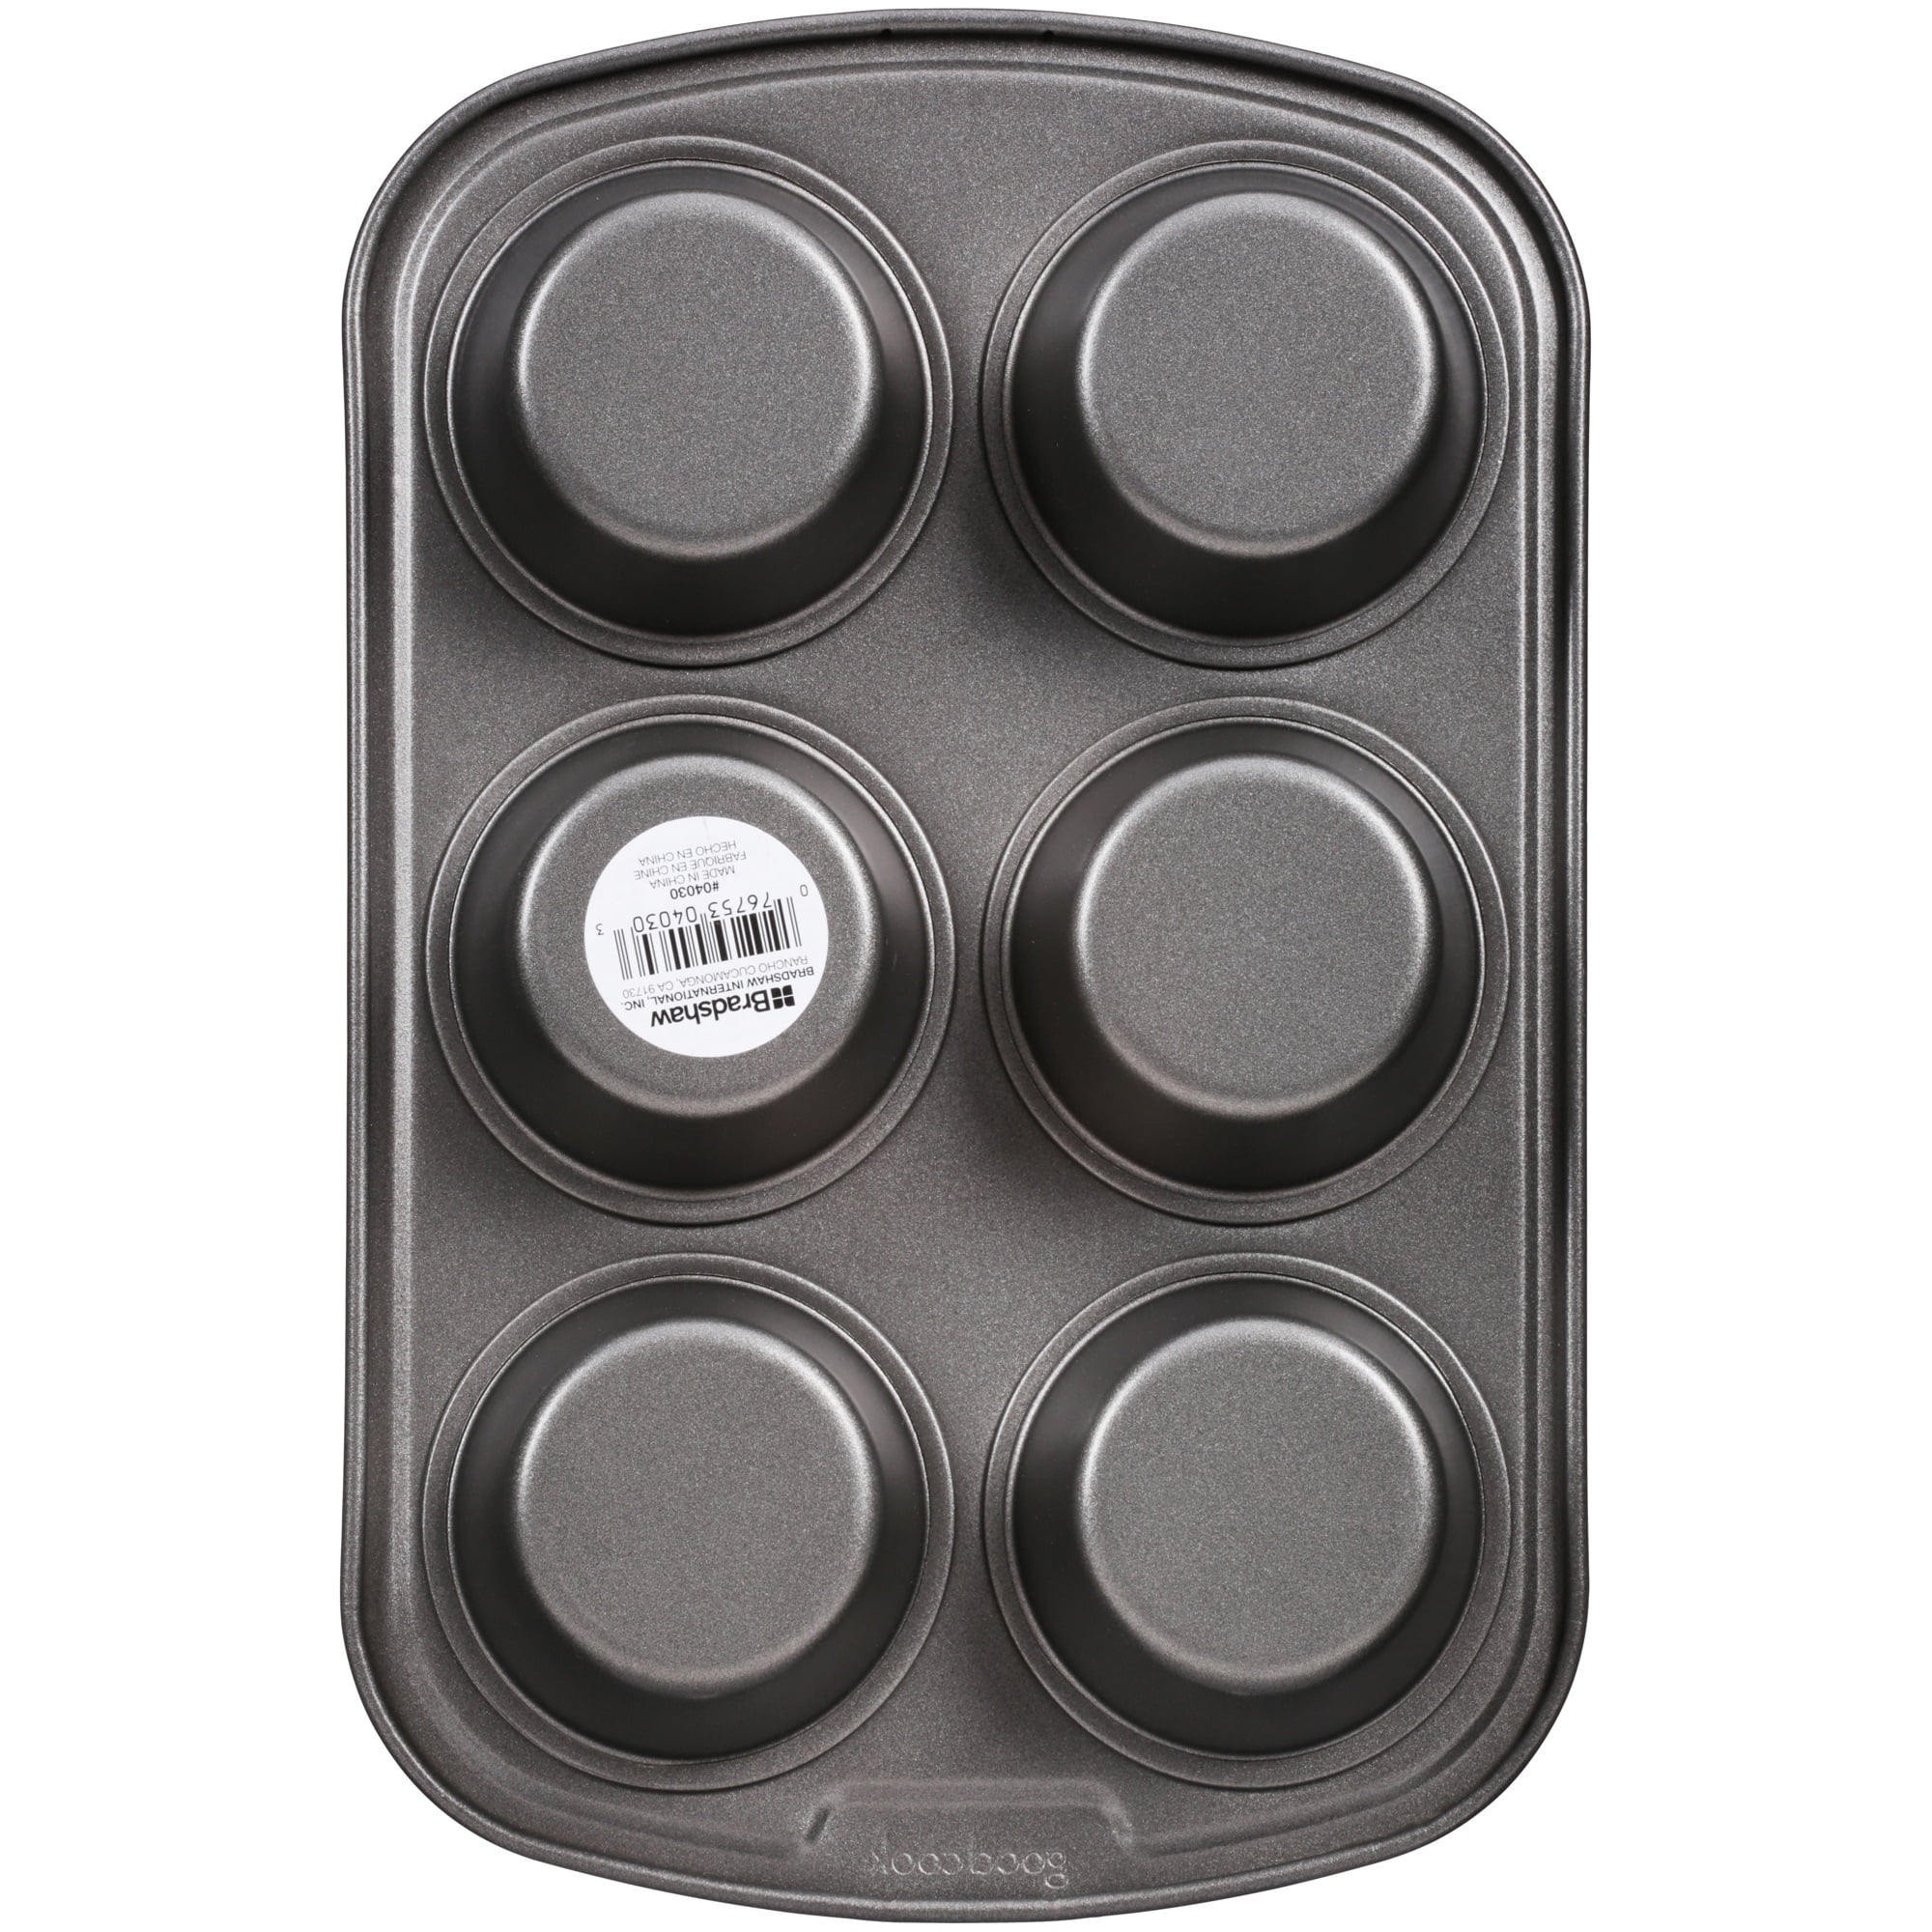 Kitchen Details 6 Cup Texas Muffin Pan